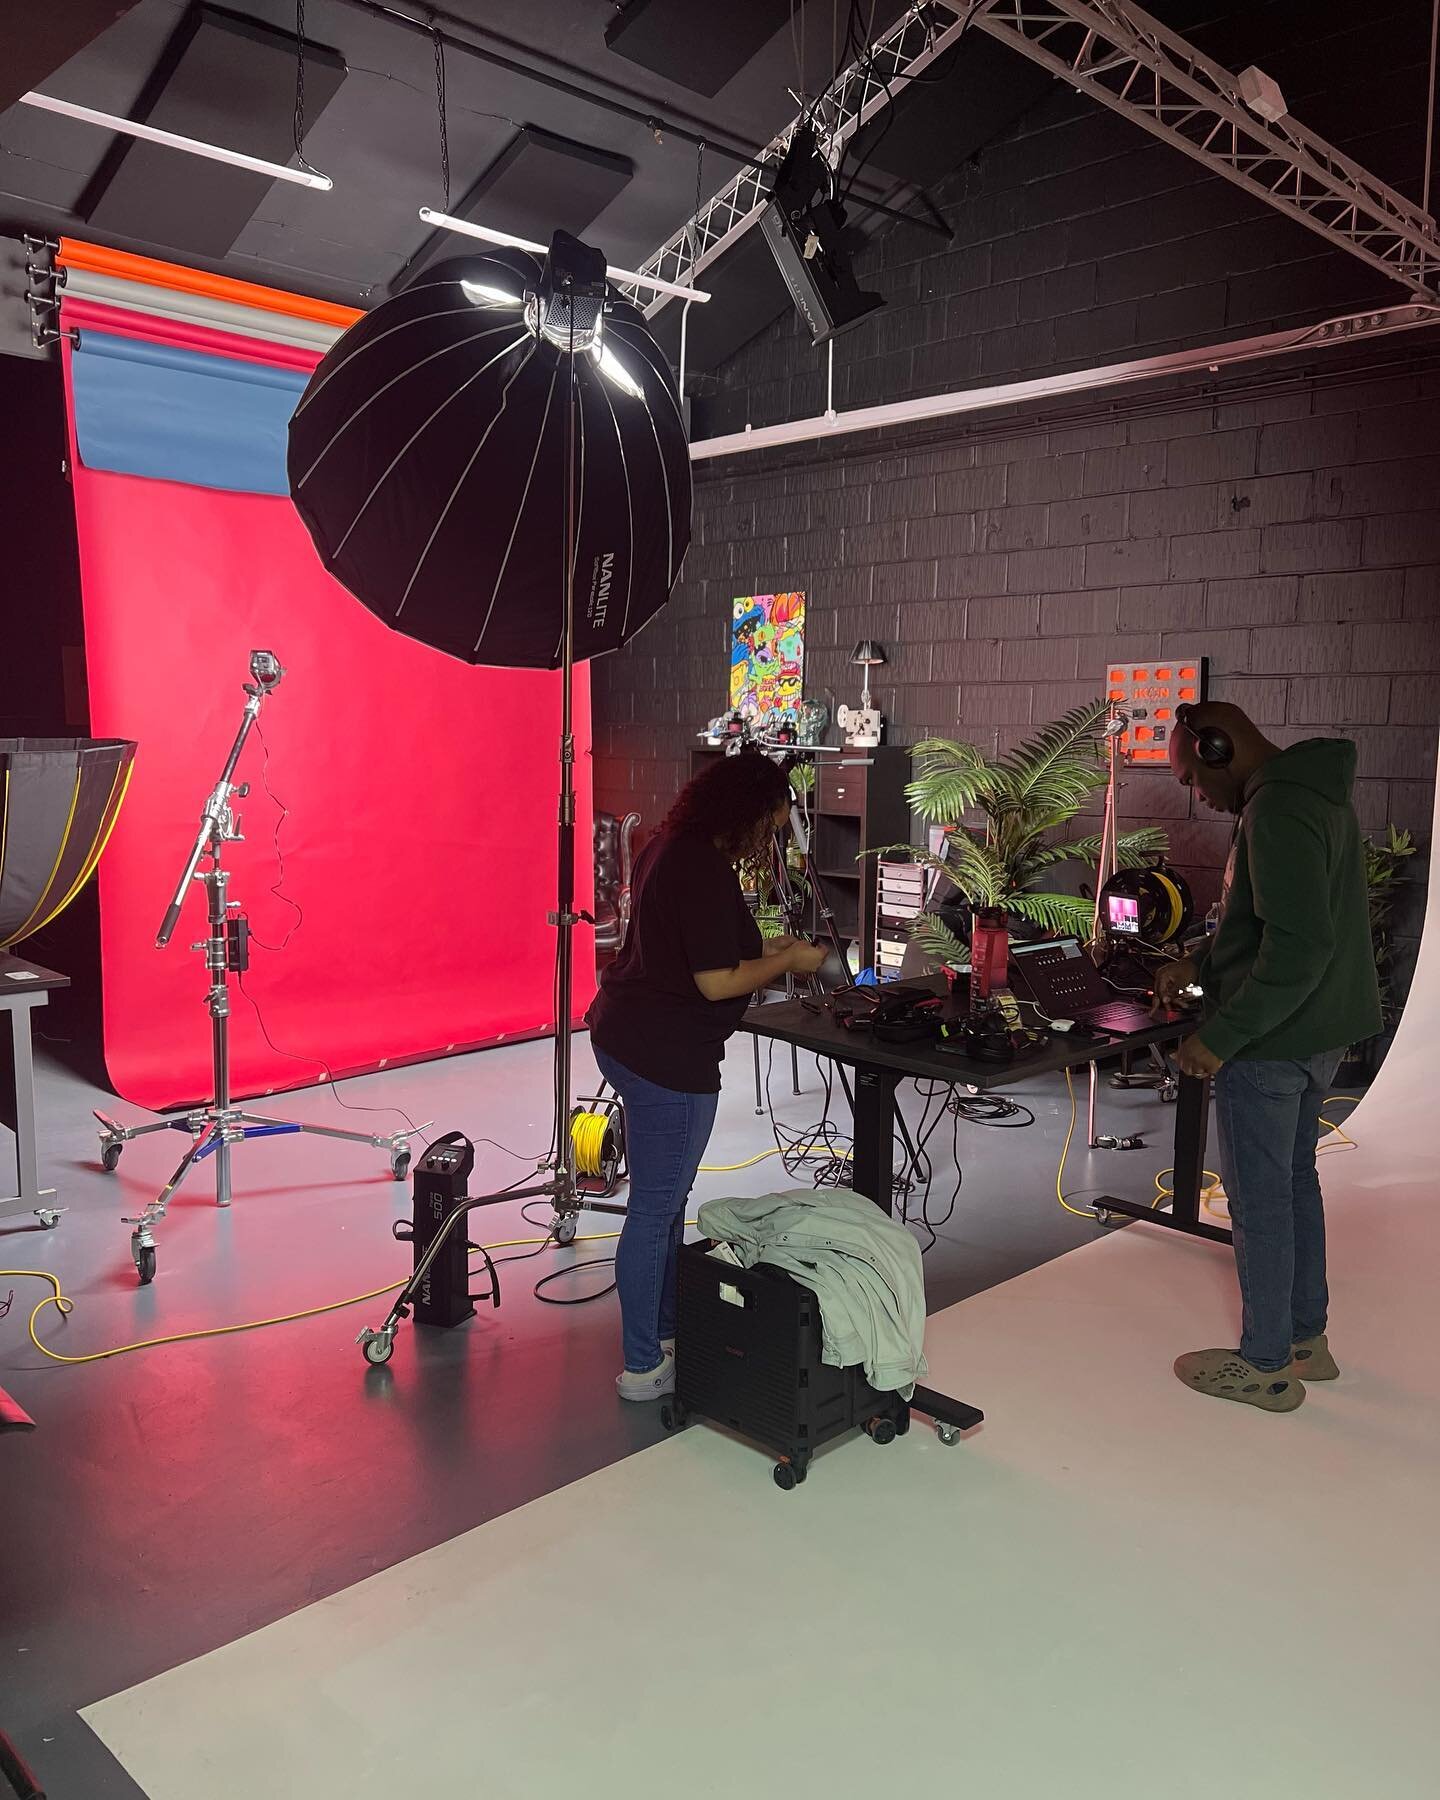 ⭐️⭐️The wonderful people at @arcglobalchurches came by at the weekend for a shoot at our studio⭐️⭐️ Here are some BTS of that shoot 📷📷📷 #videography #photography #photographystudio #colorama #backdrop #camerasetup #ikonstudiosldn #arcglobalchurche